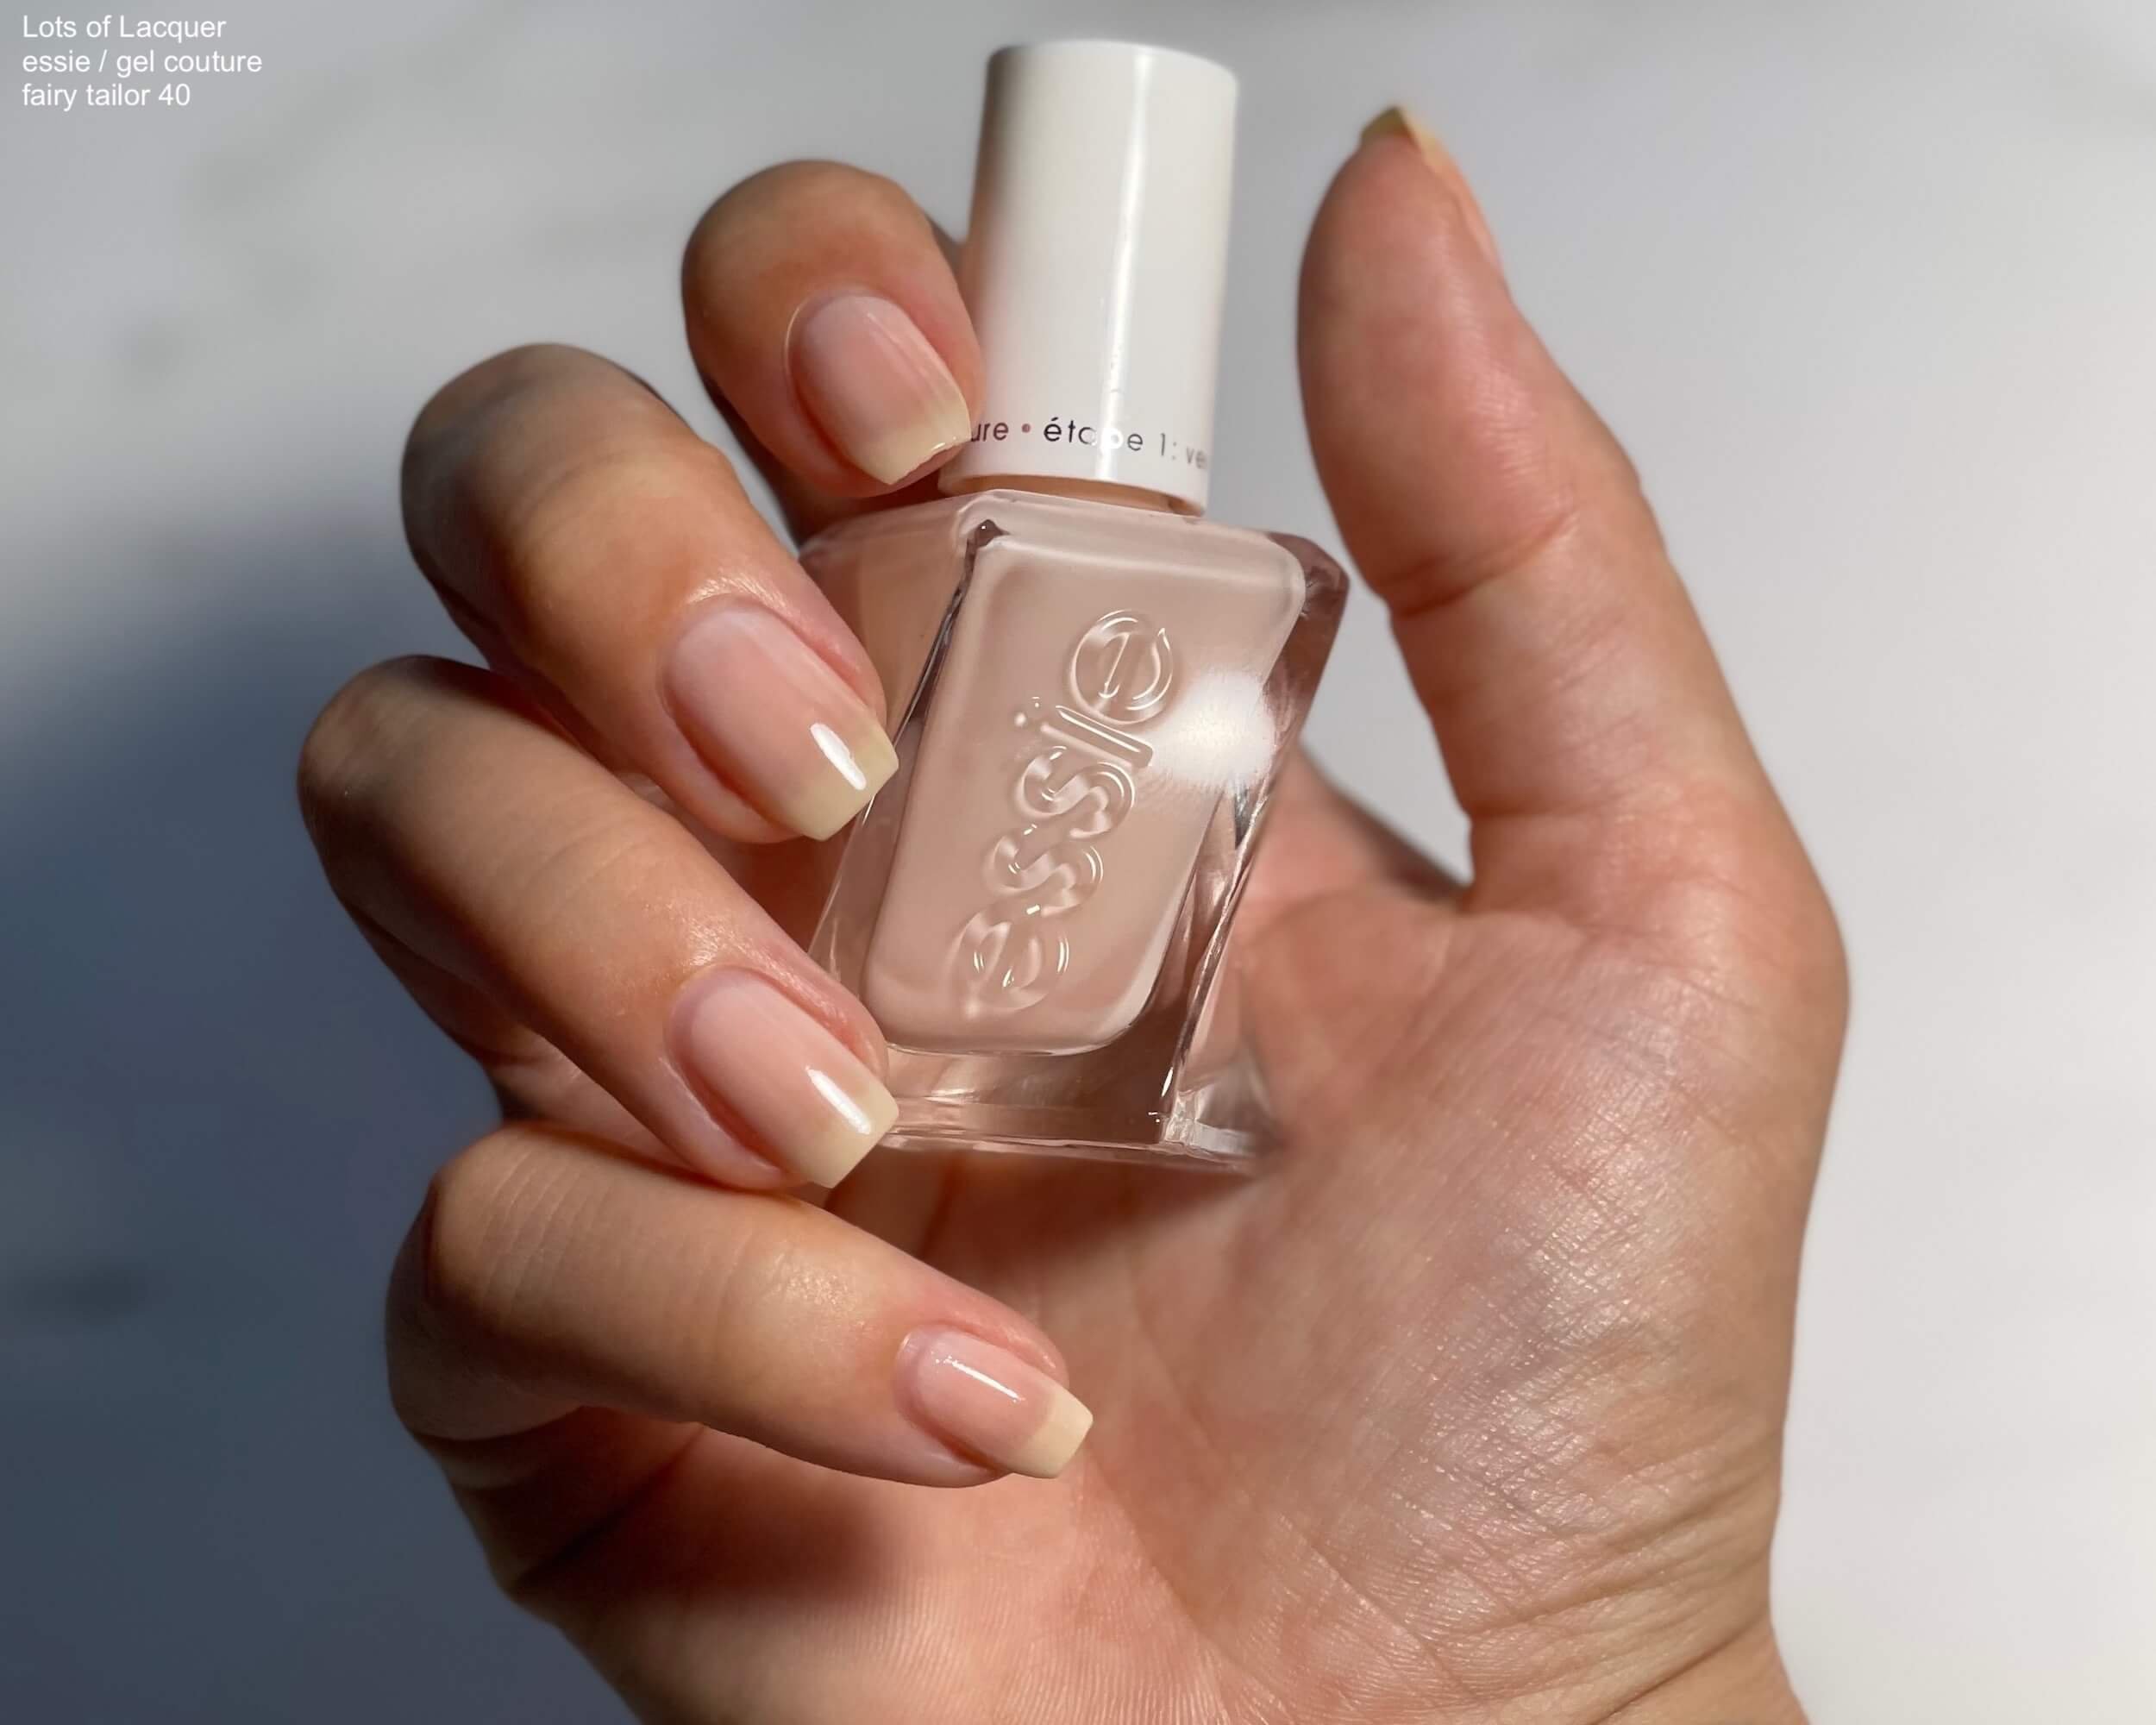 3. "Essie Gel Couture in "Fairy Tailor" - wide 8